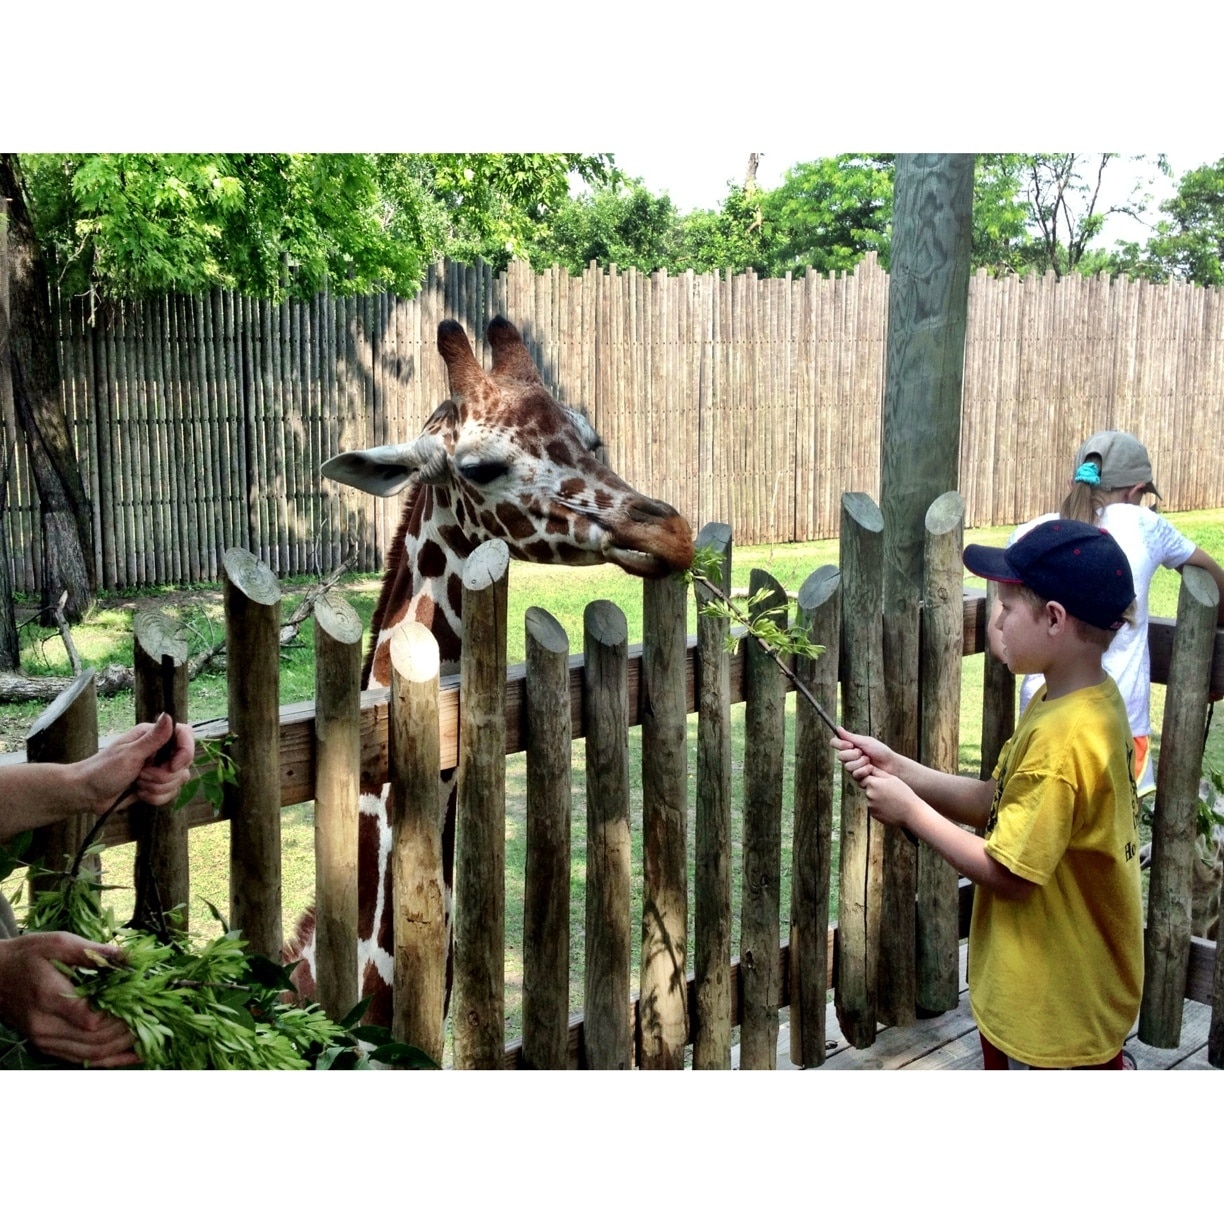 Guests can feed the giraffes in the African exhibit at the Great Plains Zoo.